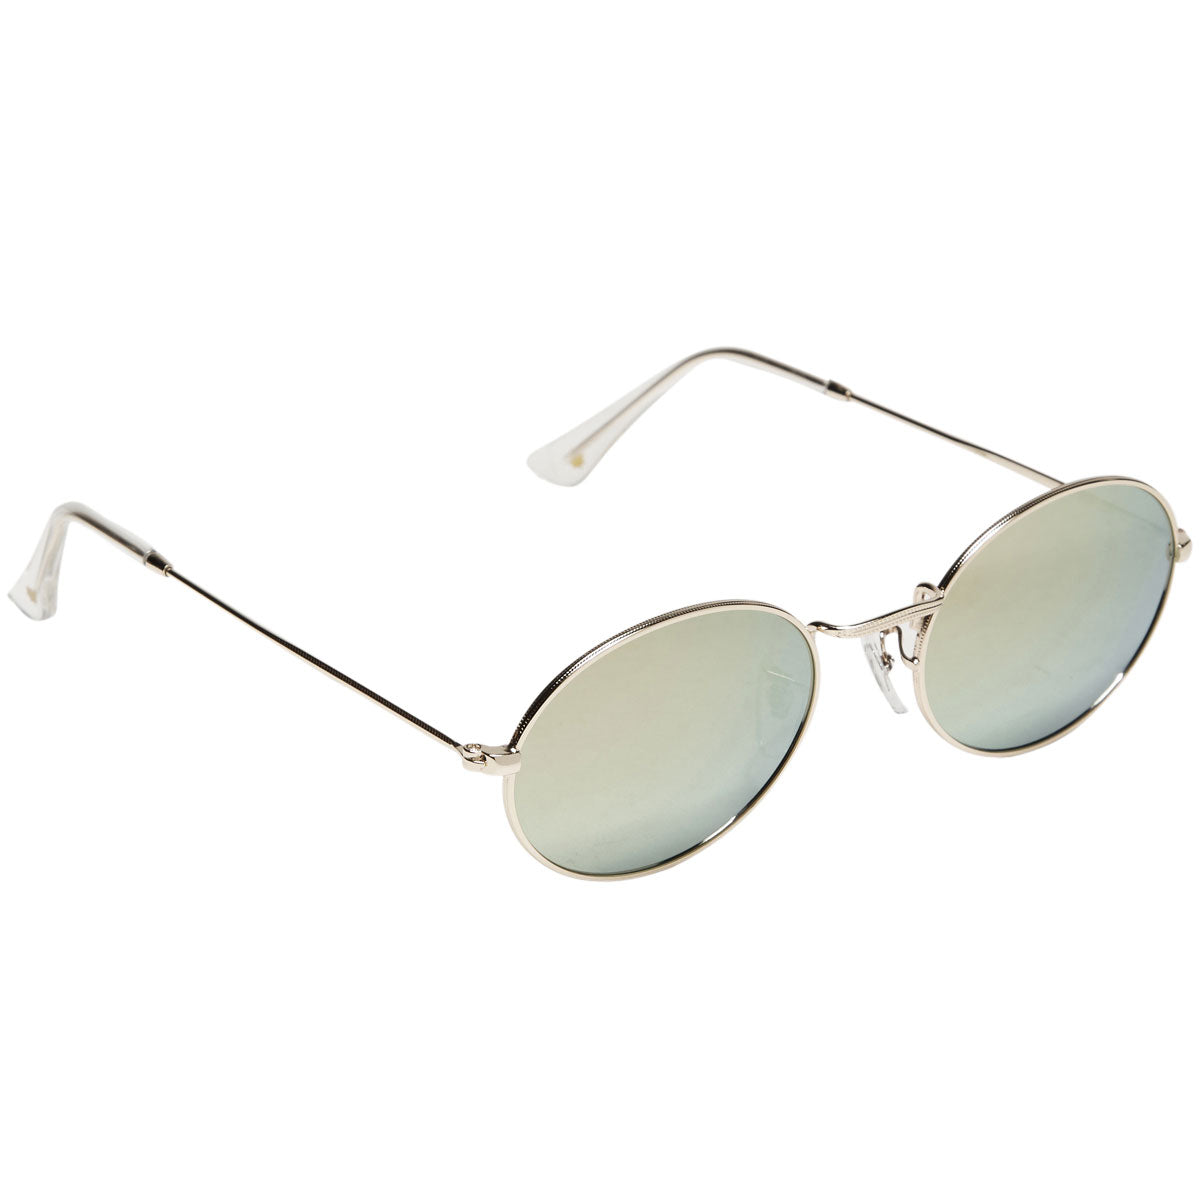 Glassy Campbell Sunglasses - Gold/Pink Mirror image 1